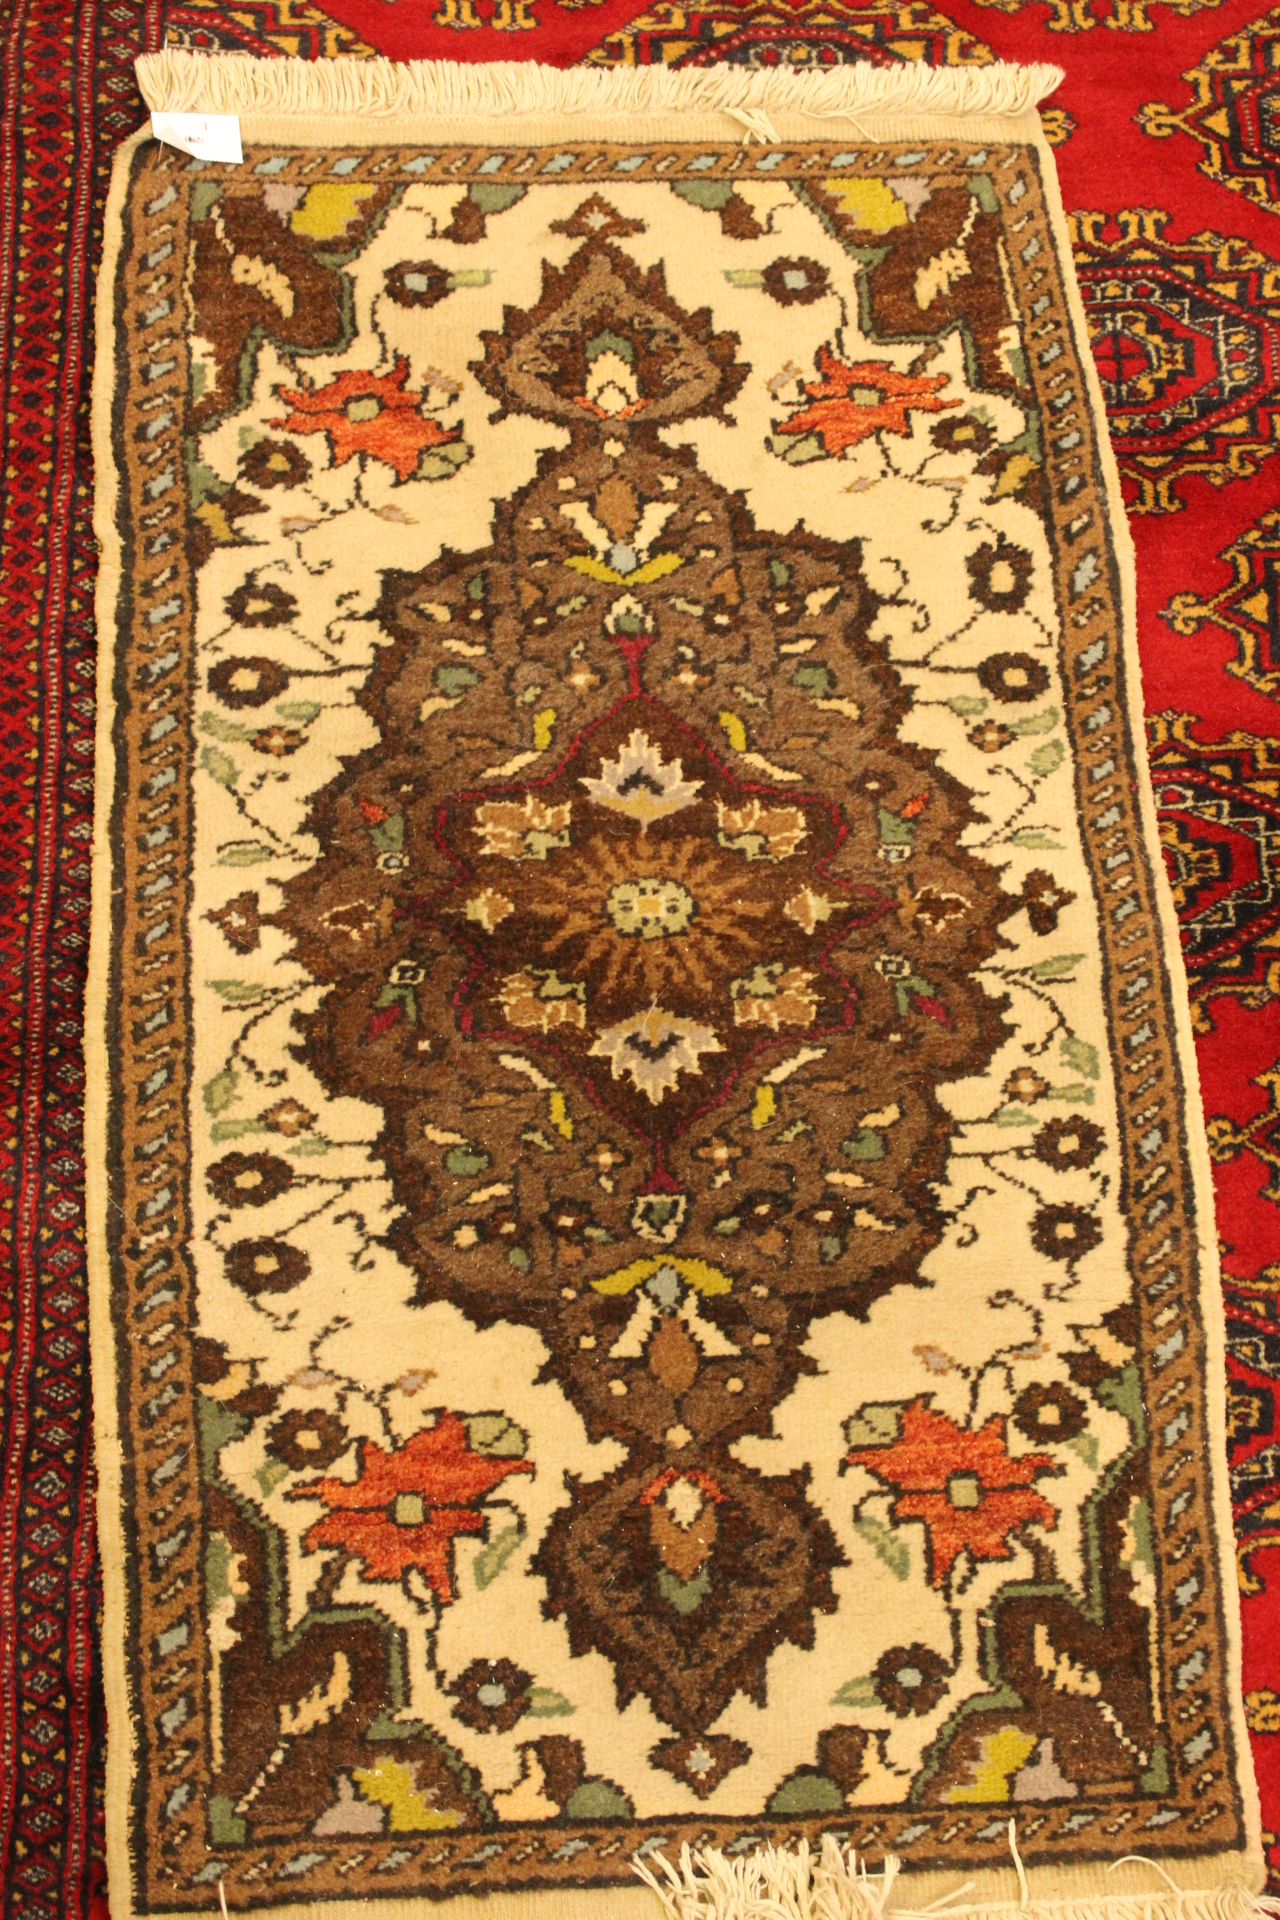 Small green rug with floral pattern